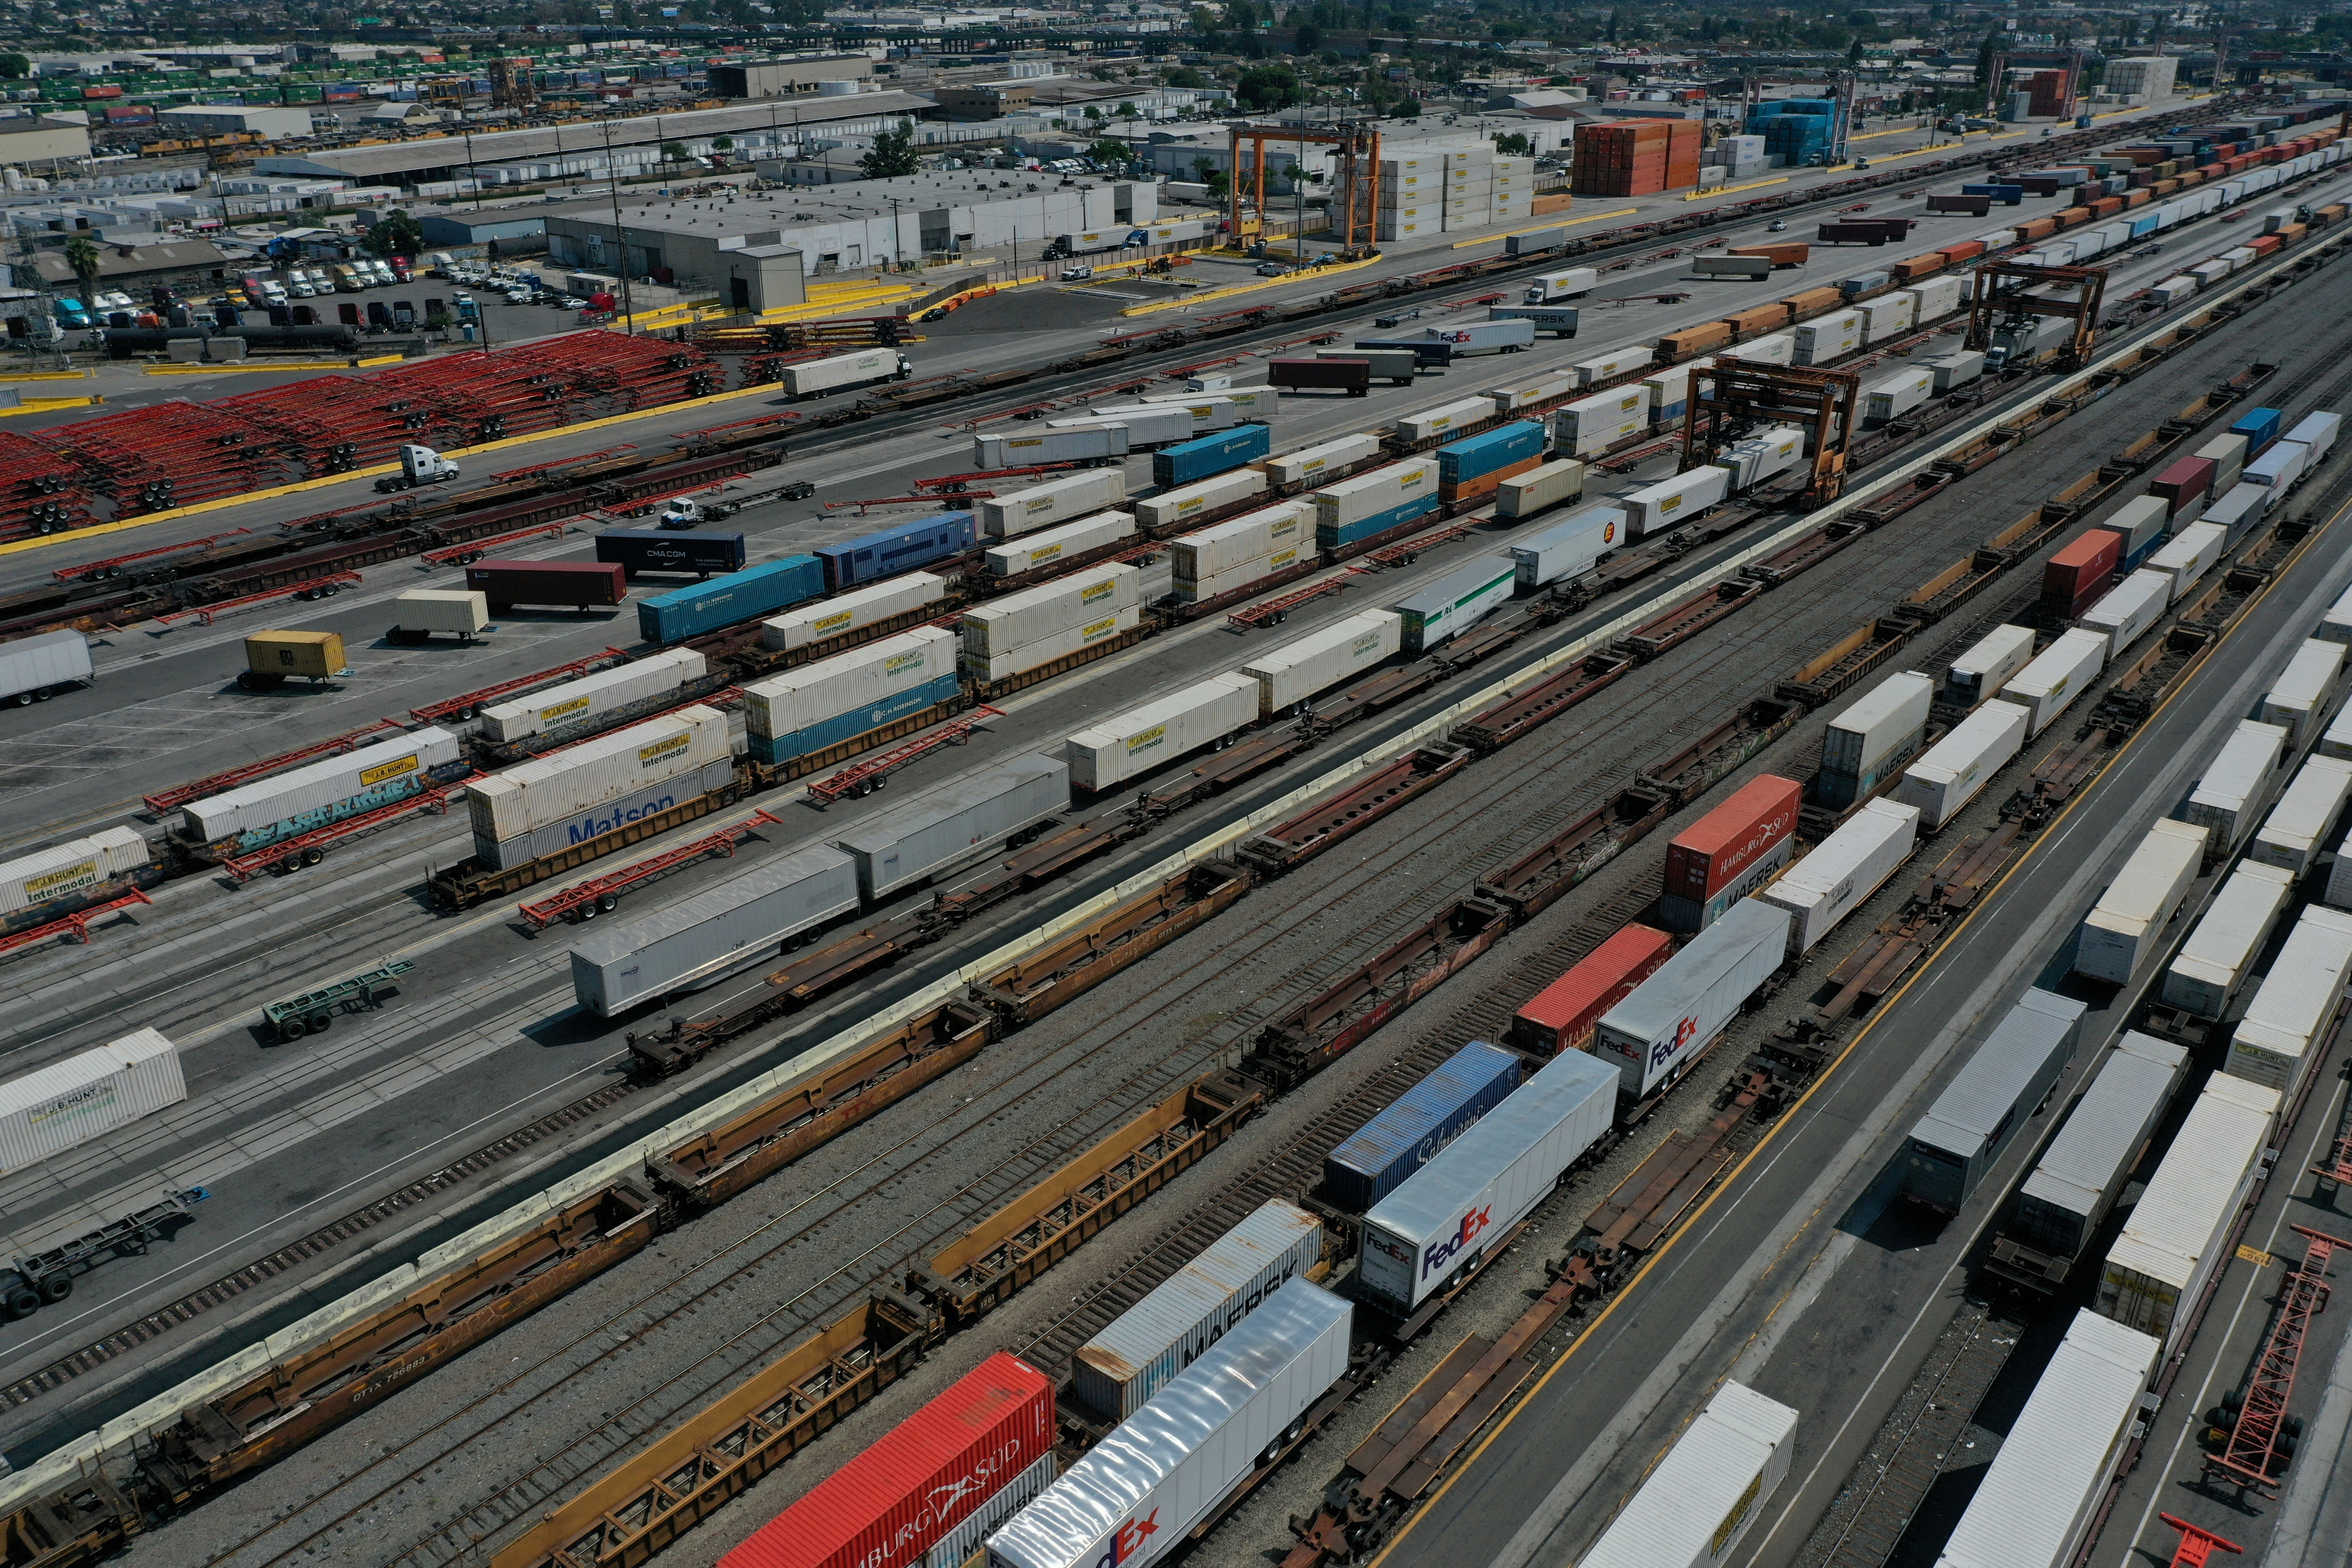 An aerial view of shipping containers and freight railway trains at the BNSF Los Angeles Intermodal Facility rail yard in Los Angele